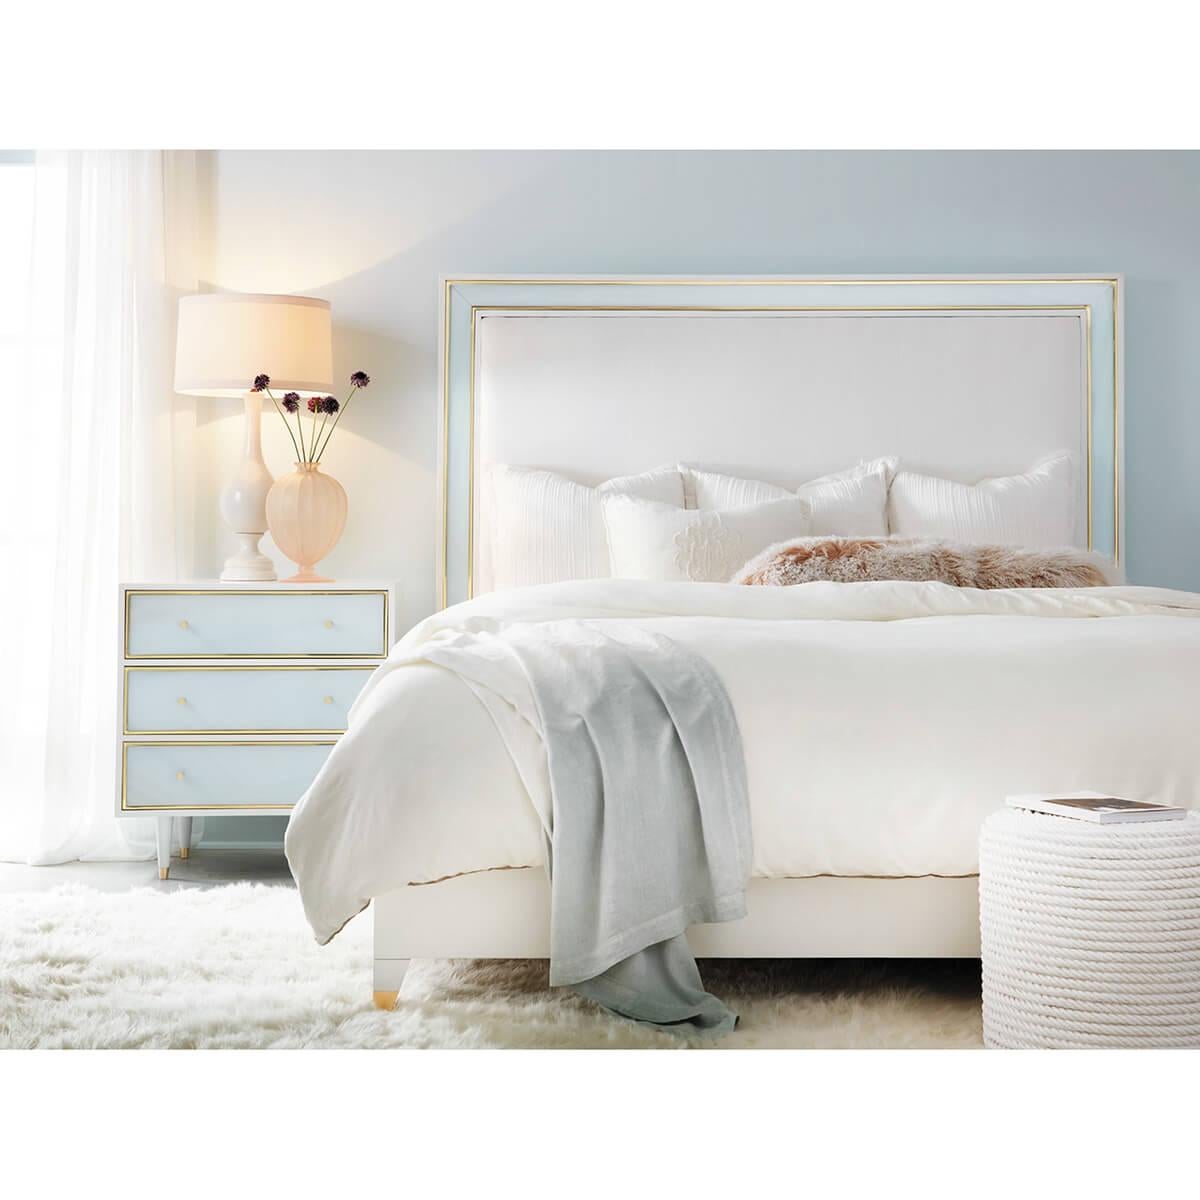 Coastal Sea Glass Bed. The wooden frame is lacquered in brilliant white with the headboard inset with Sea Glass foam color acrylic and framed in brass trim. Raised on tapered legs.

US Queen Dimensions: 67